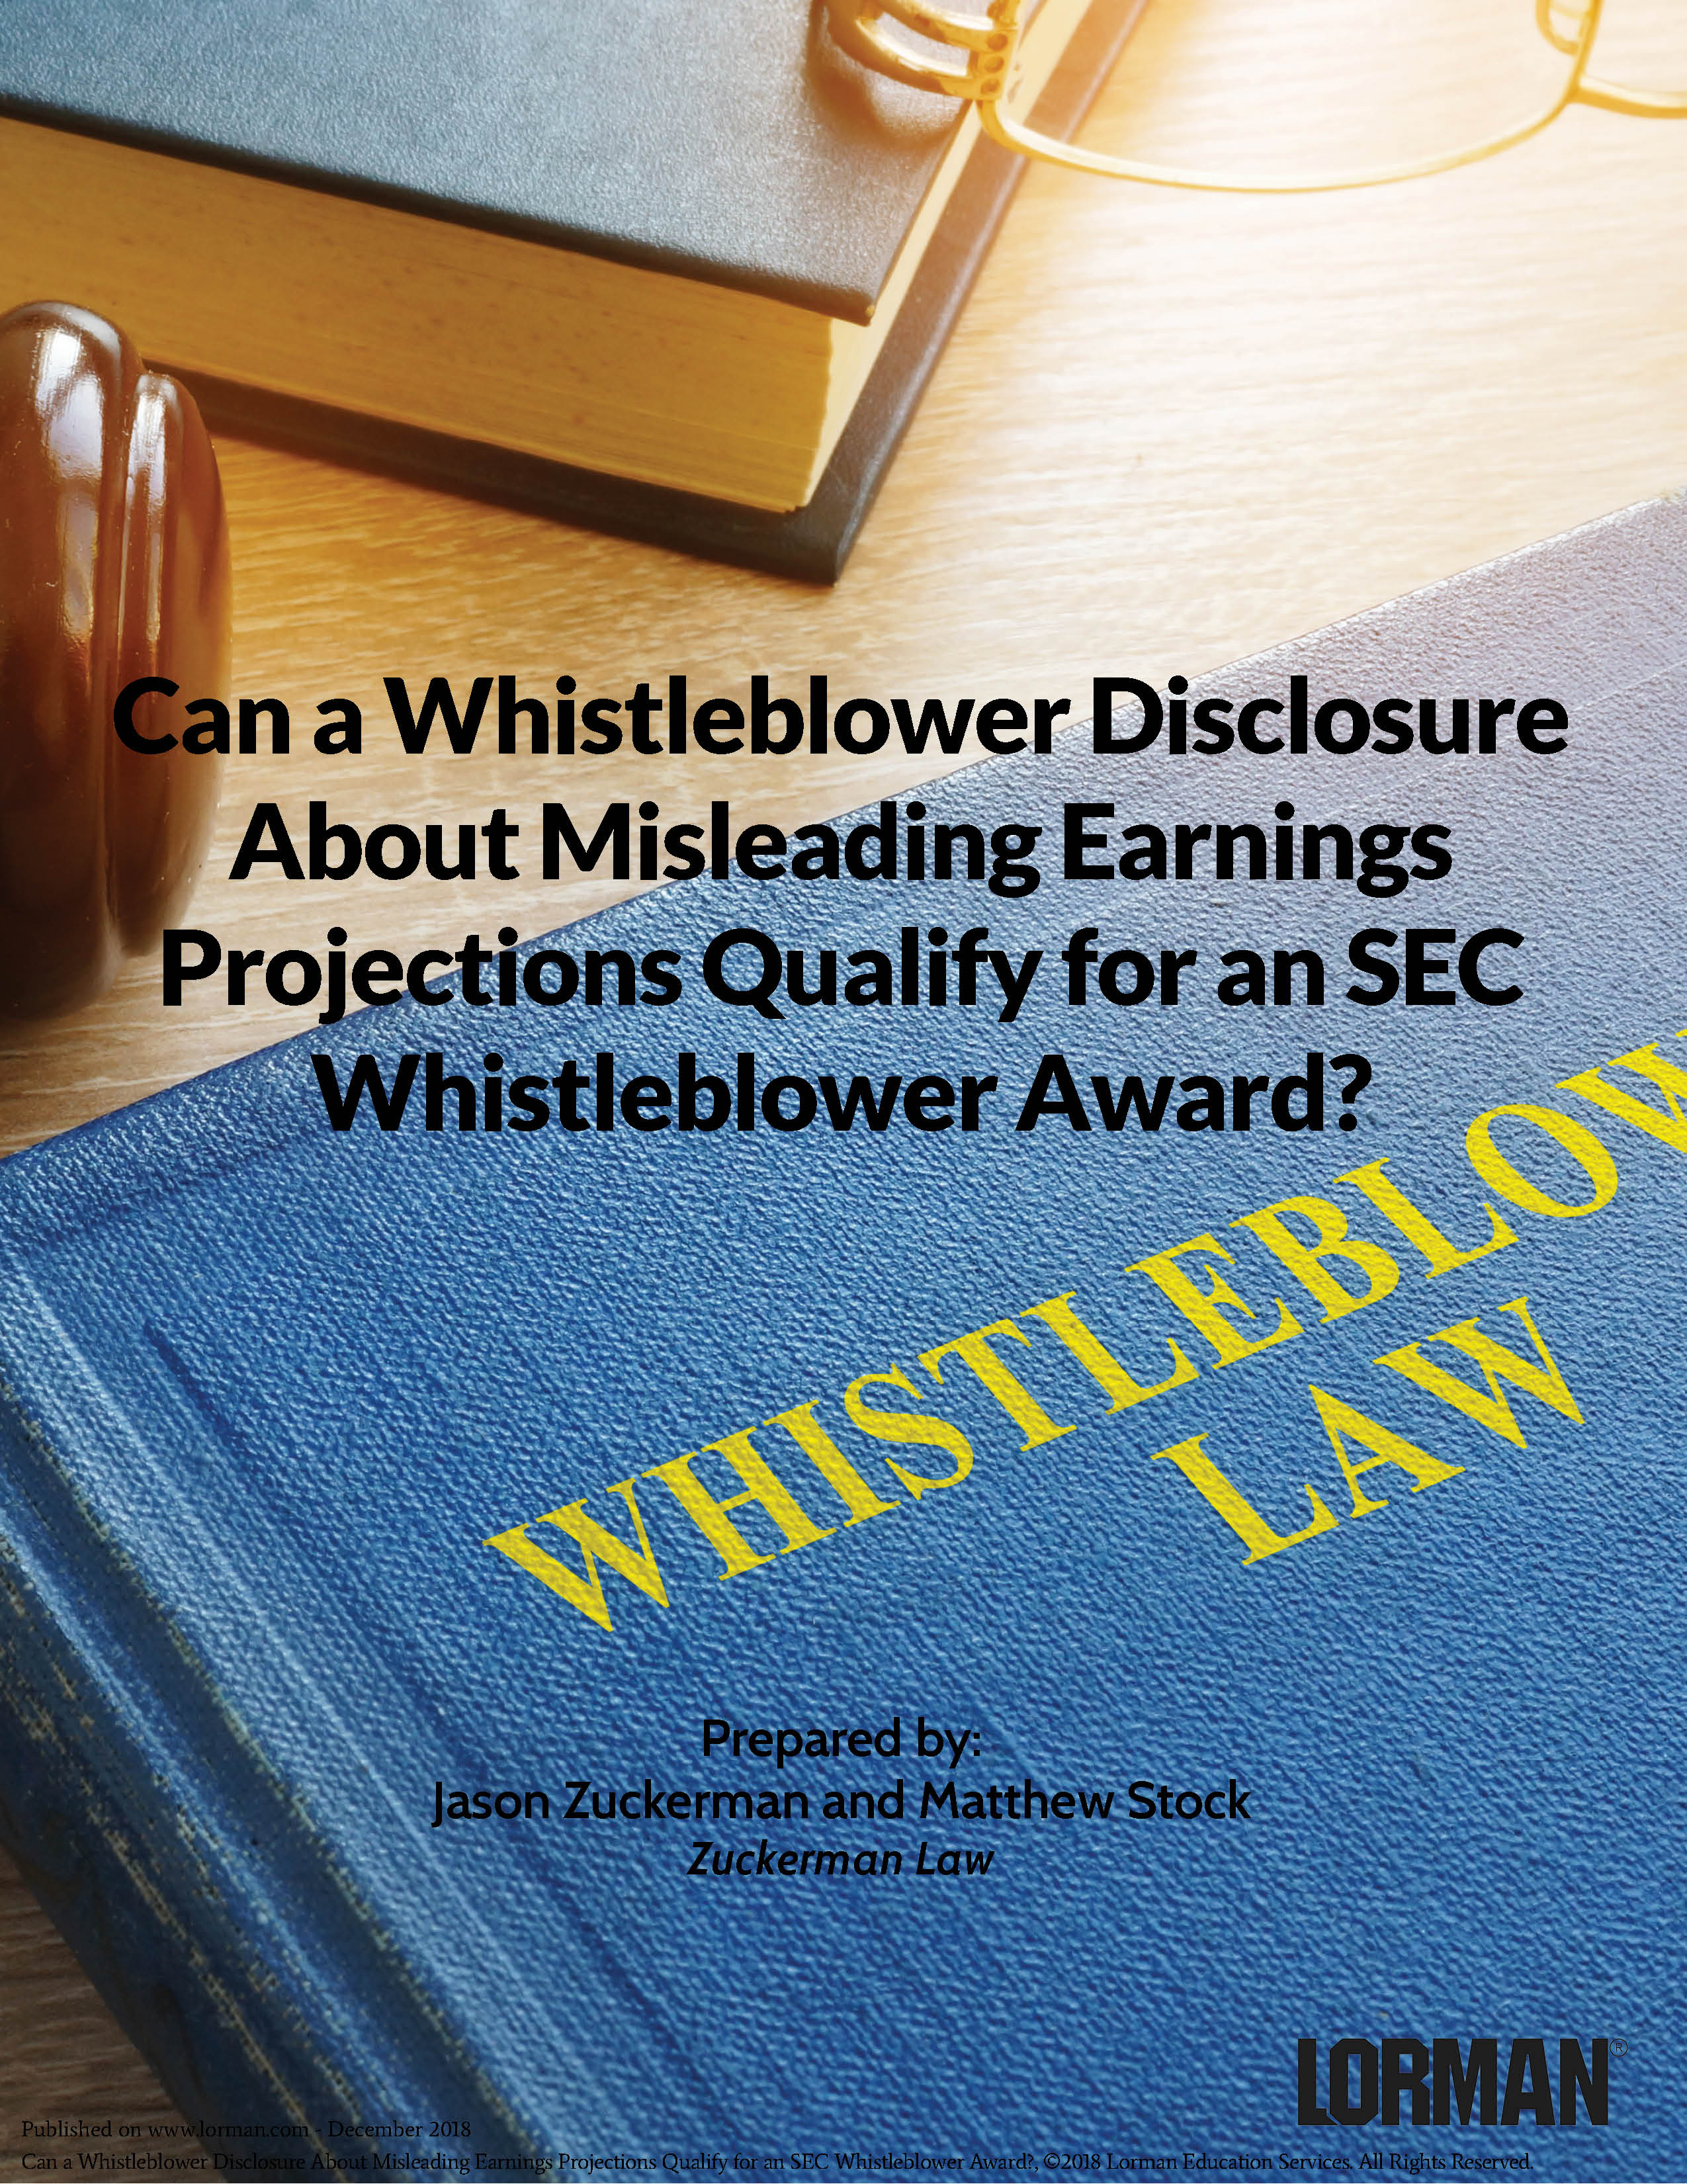 Can Disclosure About Misleading Earnings Projections Qualify for an SEC Whistleblower Award?